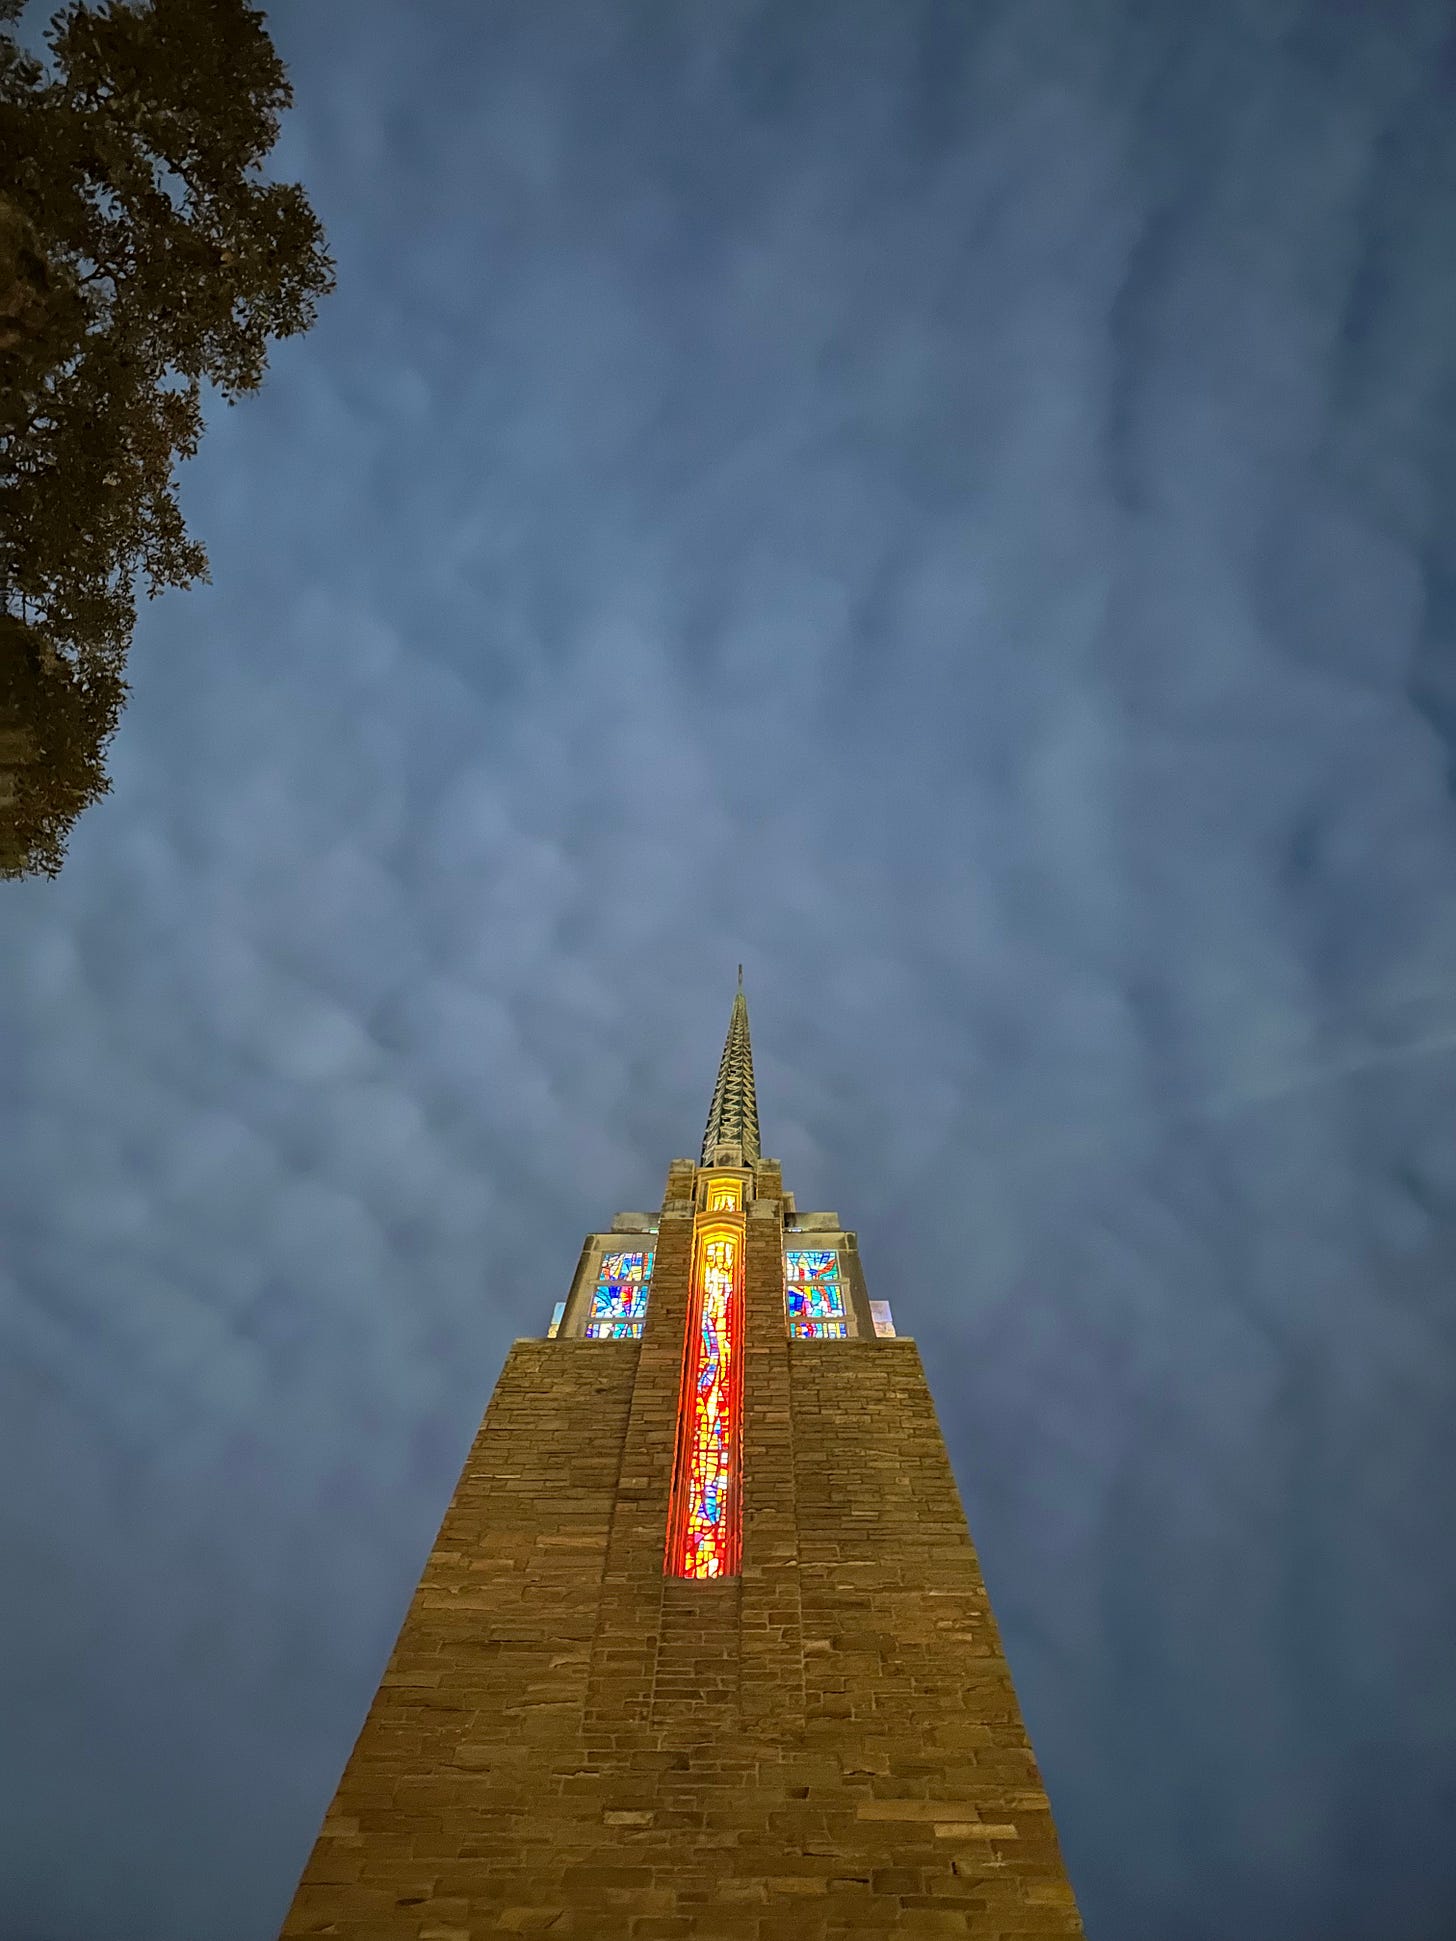 Looking up along a brick church steeple with lit stained glass against a cloudy sky